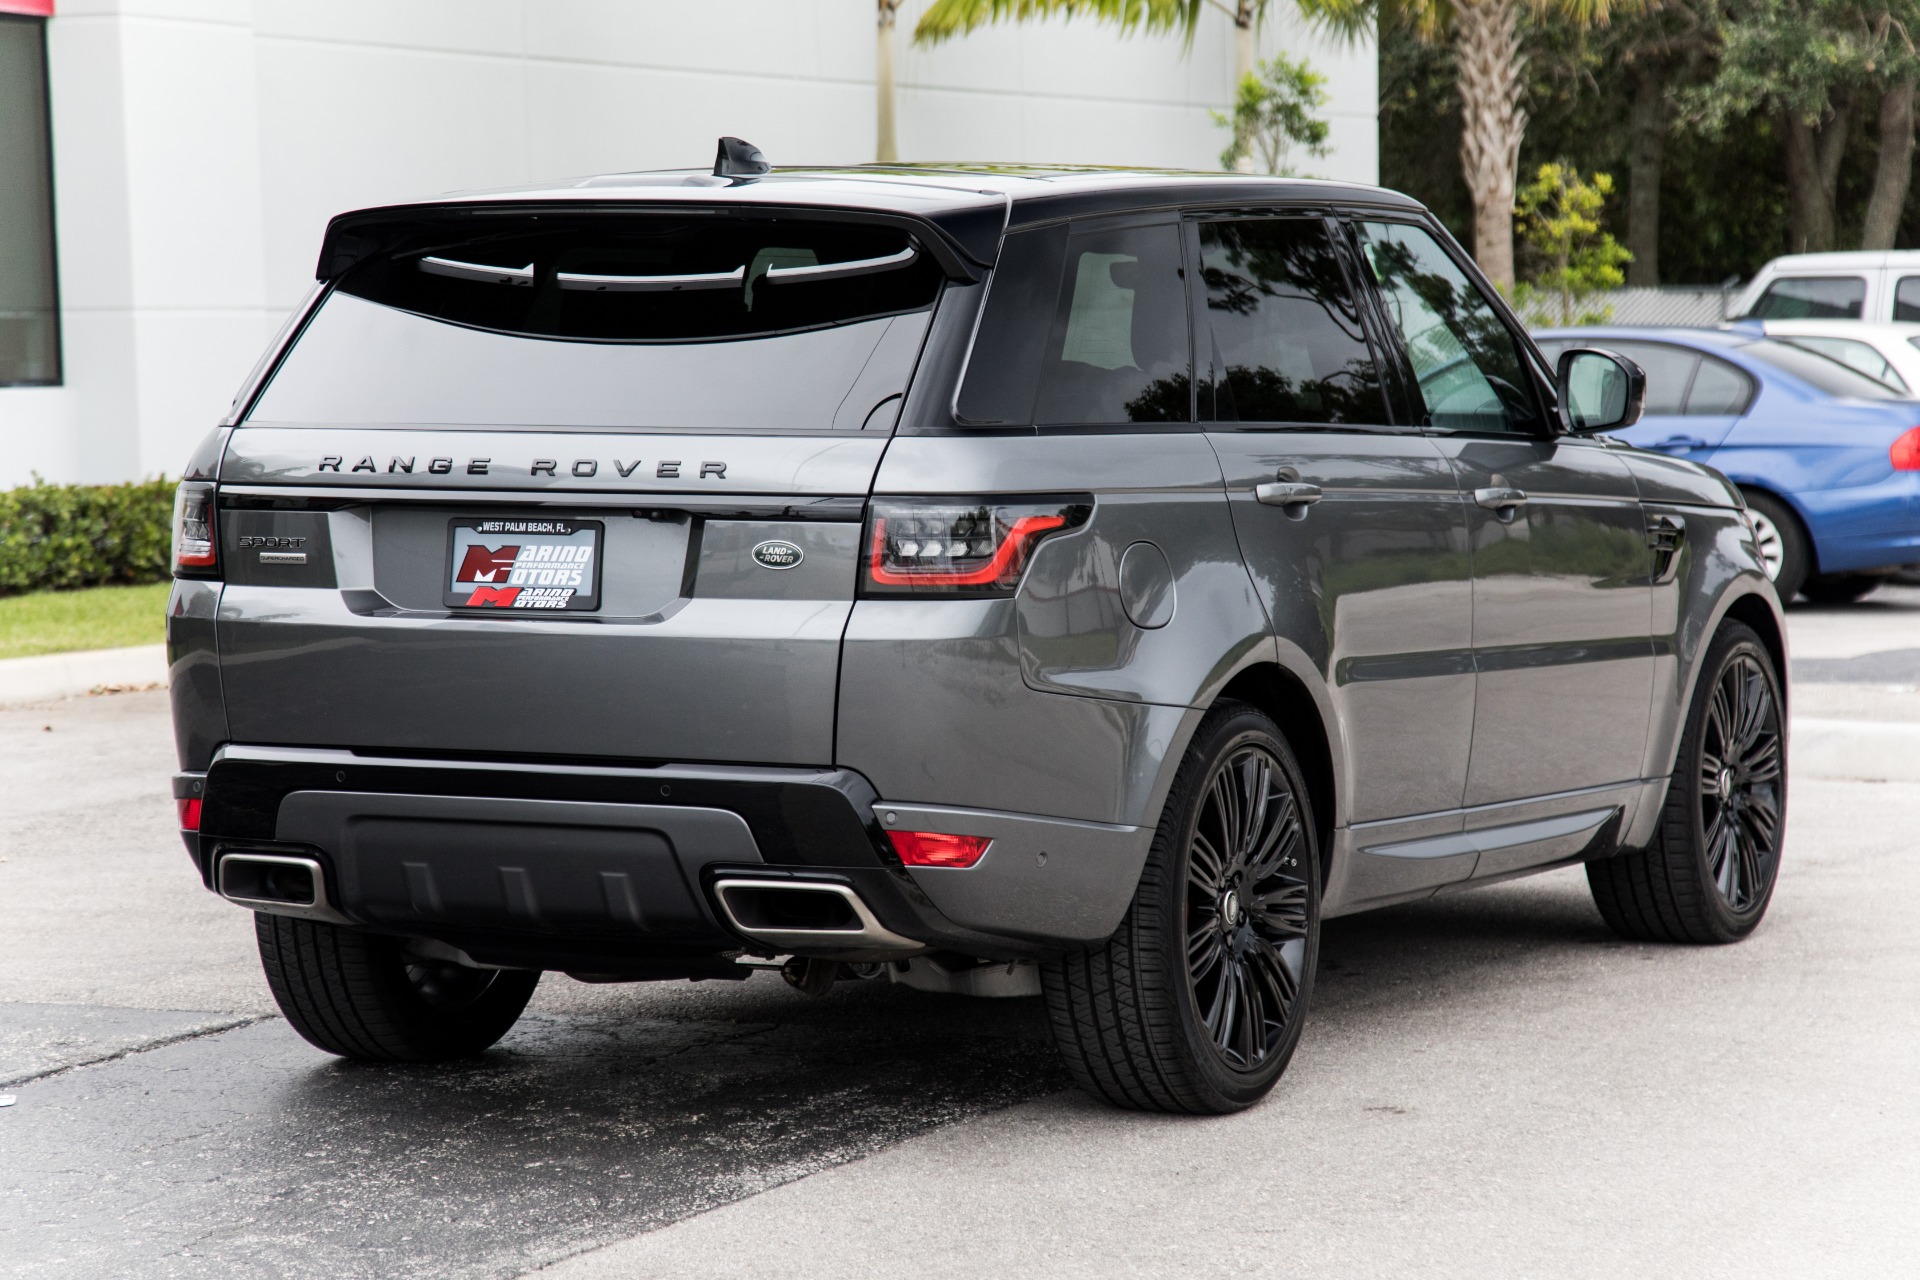 Used 2019 Land Rover Range Rover Sport Supercharged